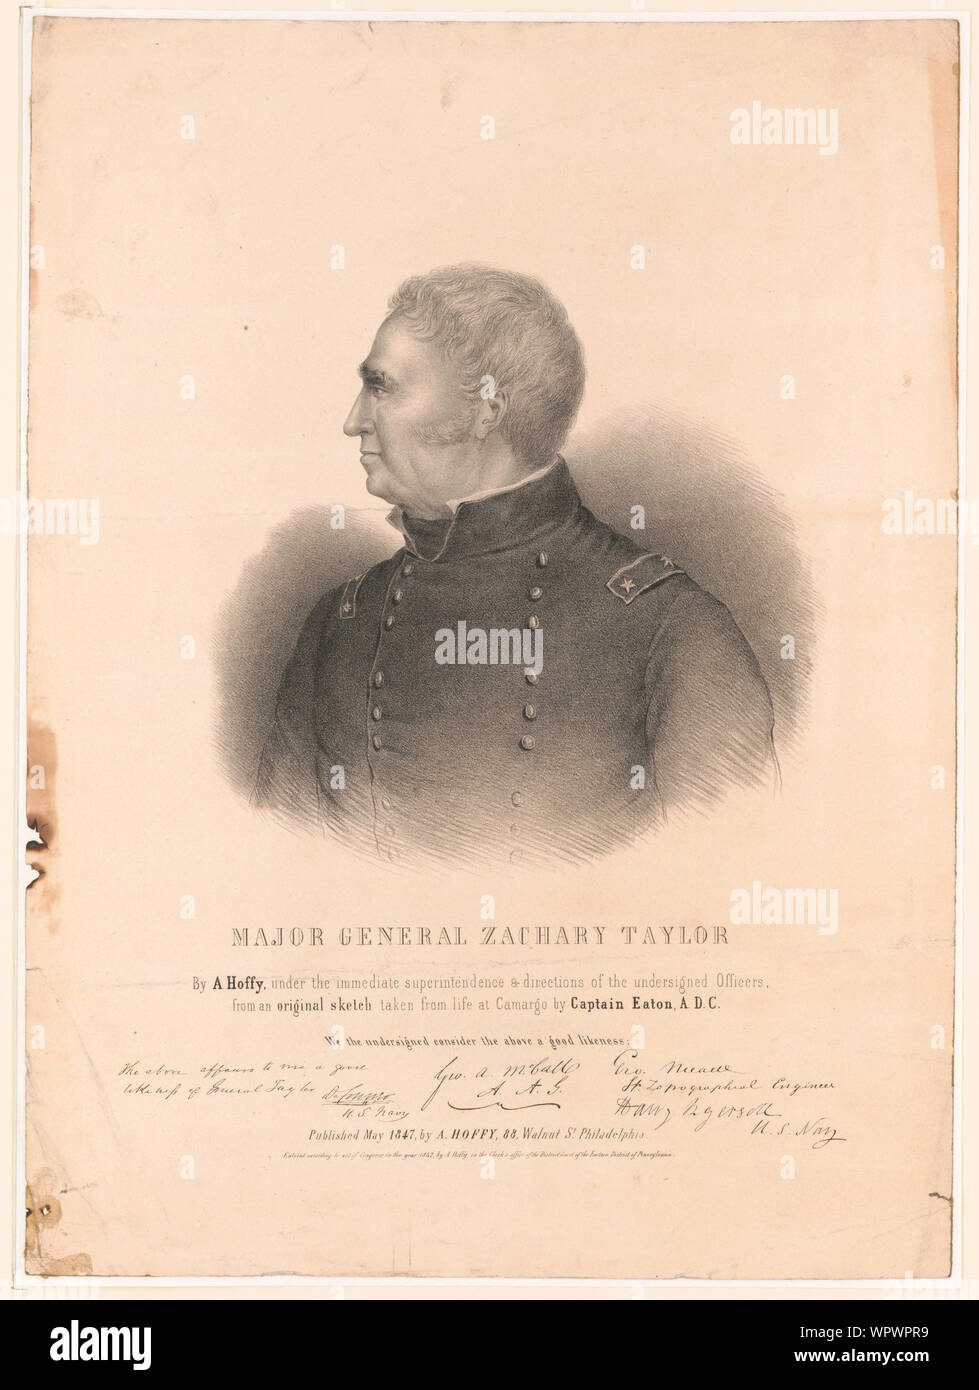 Major General Zachary Taylor / by A. Hoffy, under the immediate superintendence & directions of the undersigned officers, from an original sketch taken from life at Camargo by Captain Eaton, A.D.C. Stock Photo